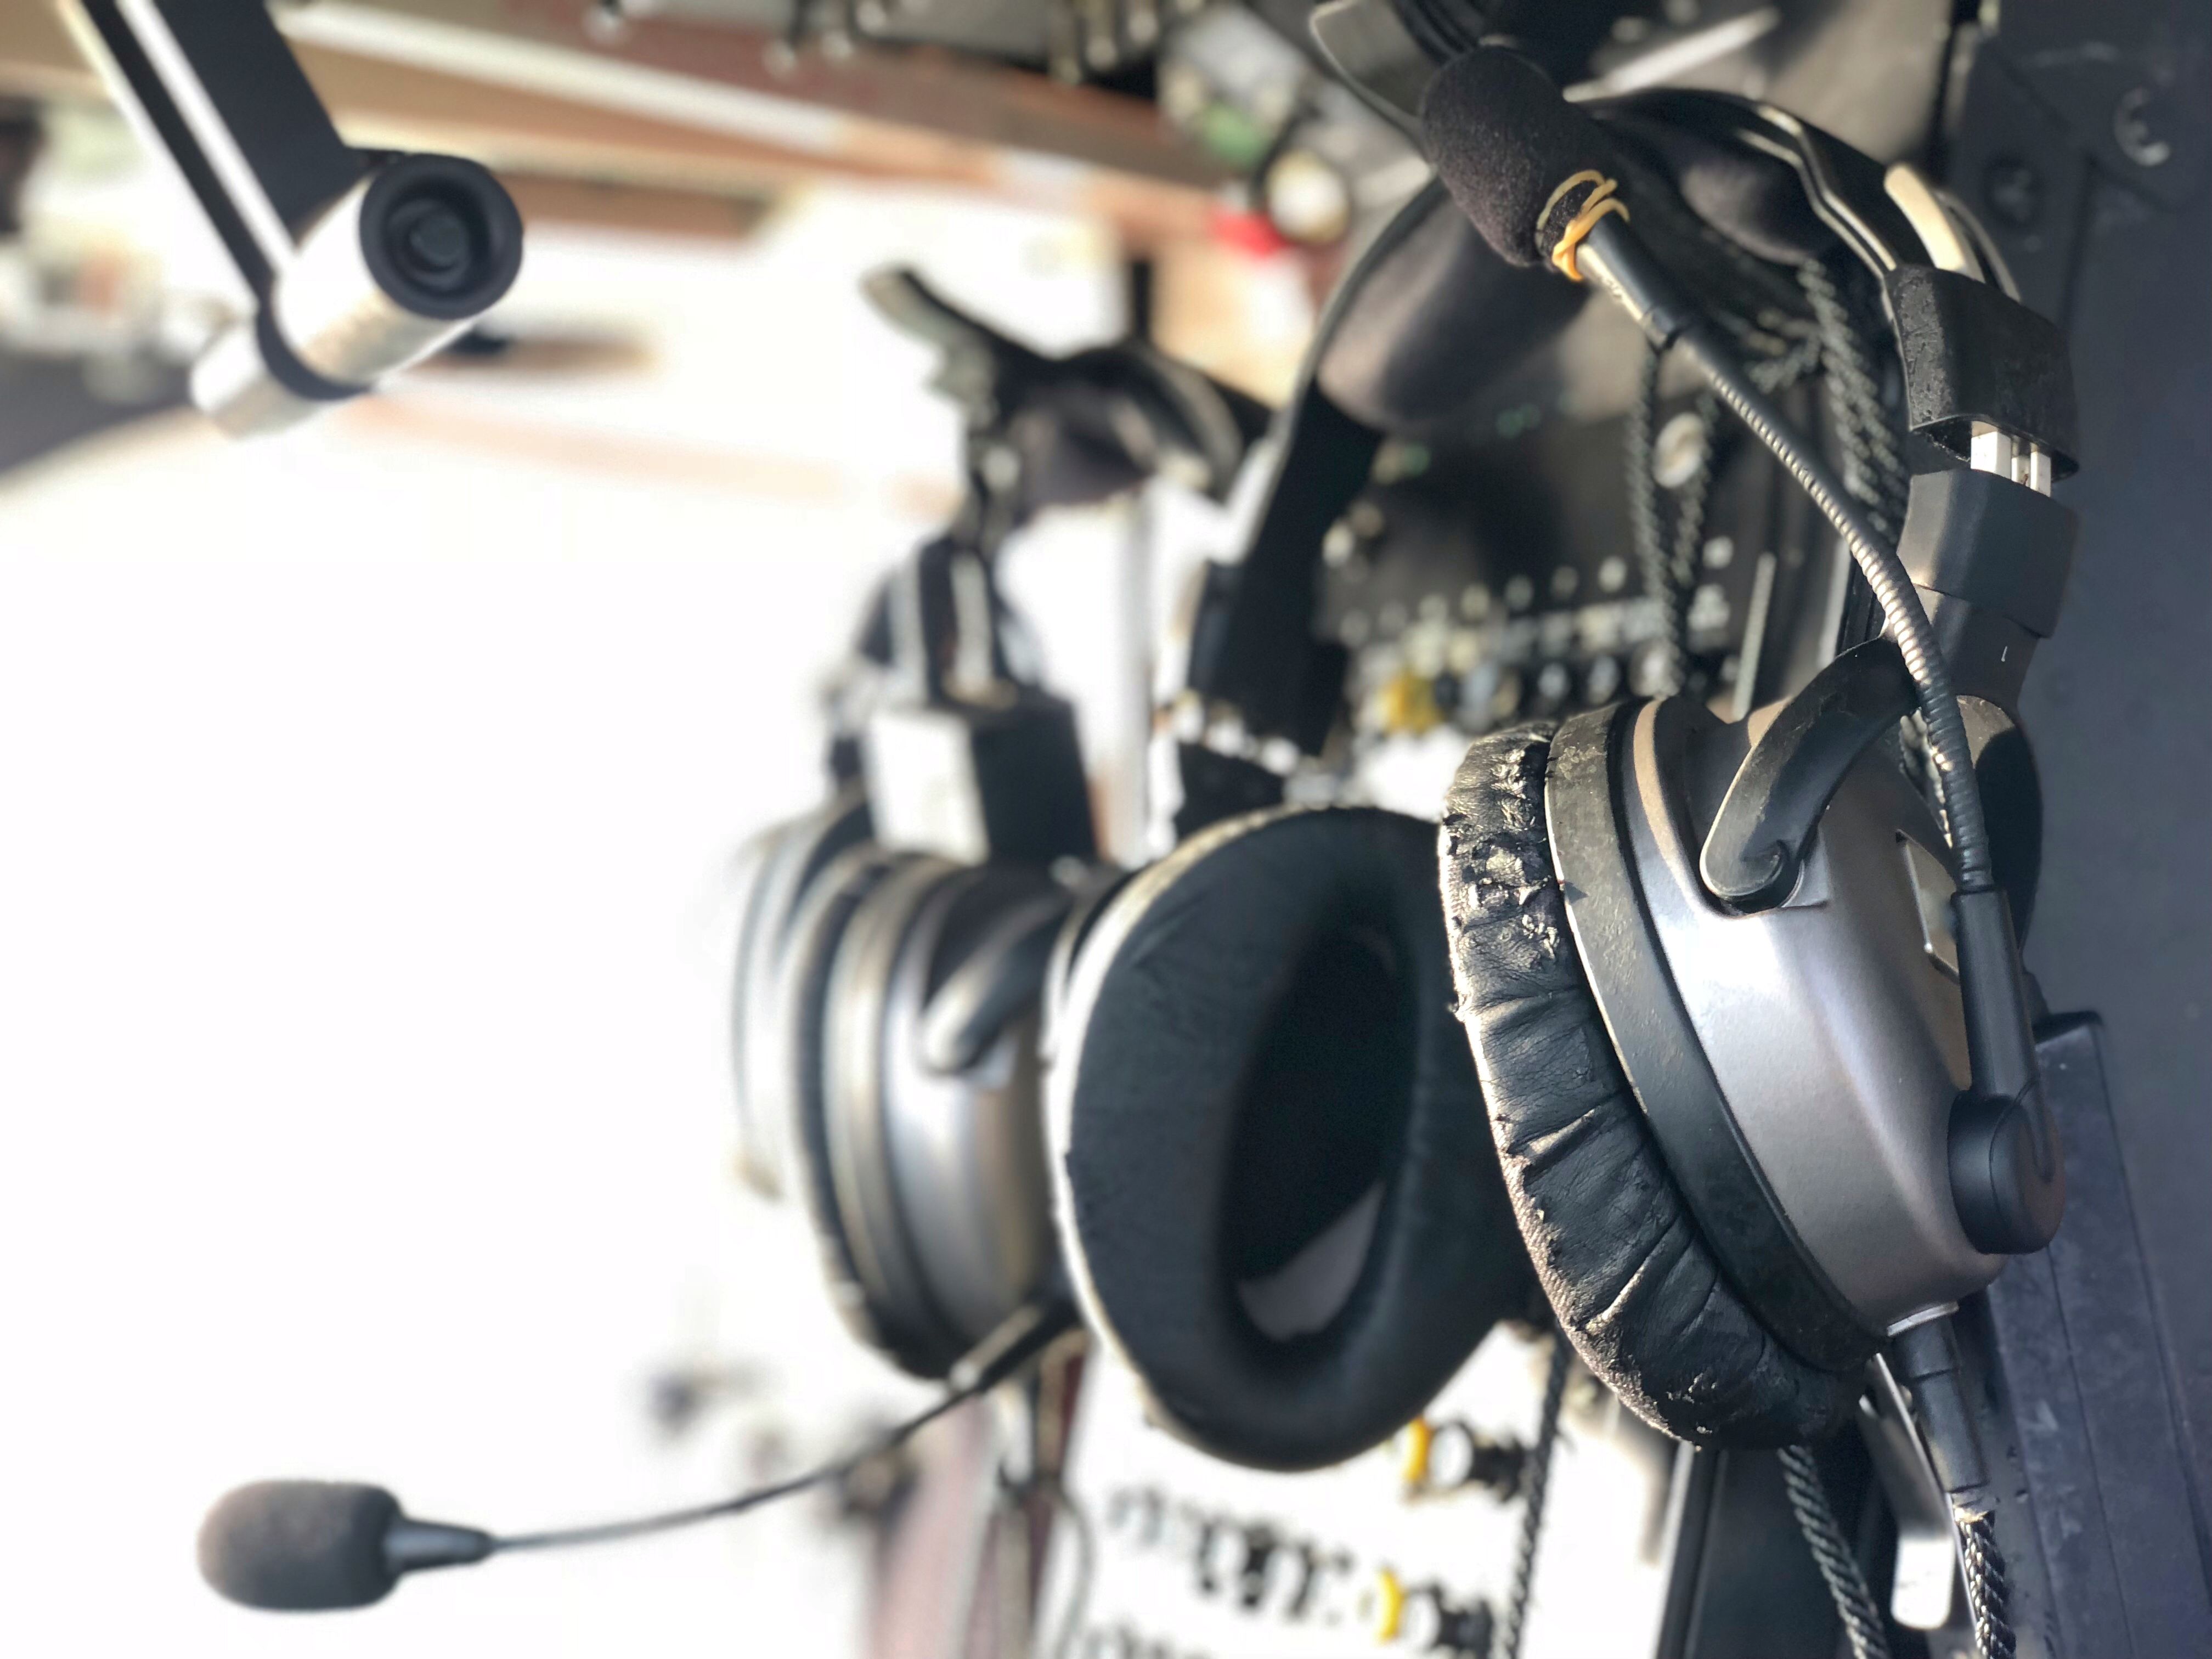 Pairs of headsets hanging on a flight deck wall.